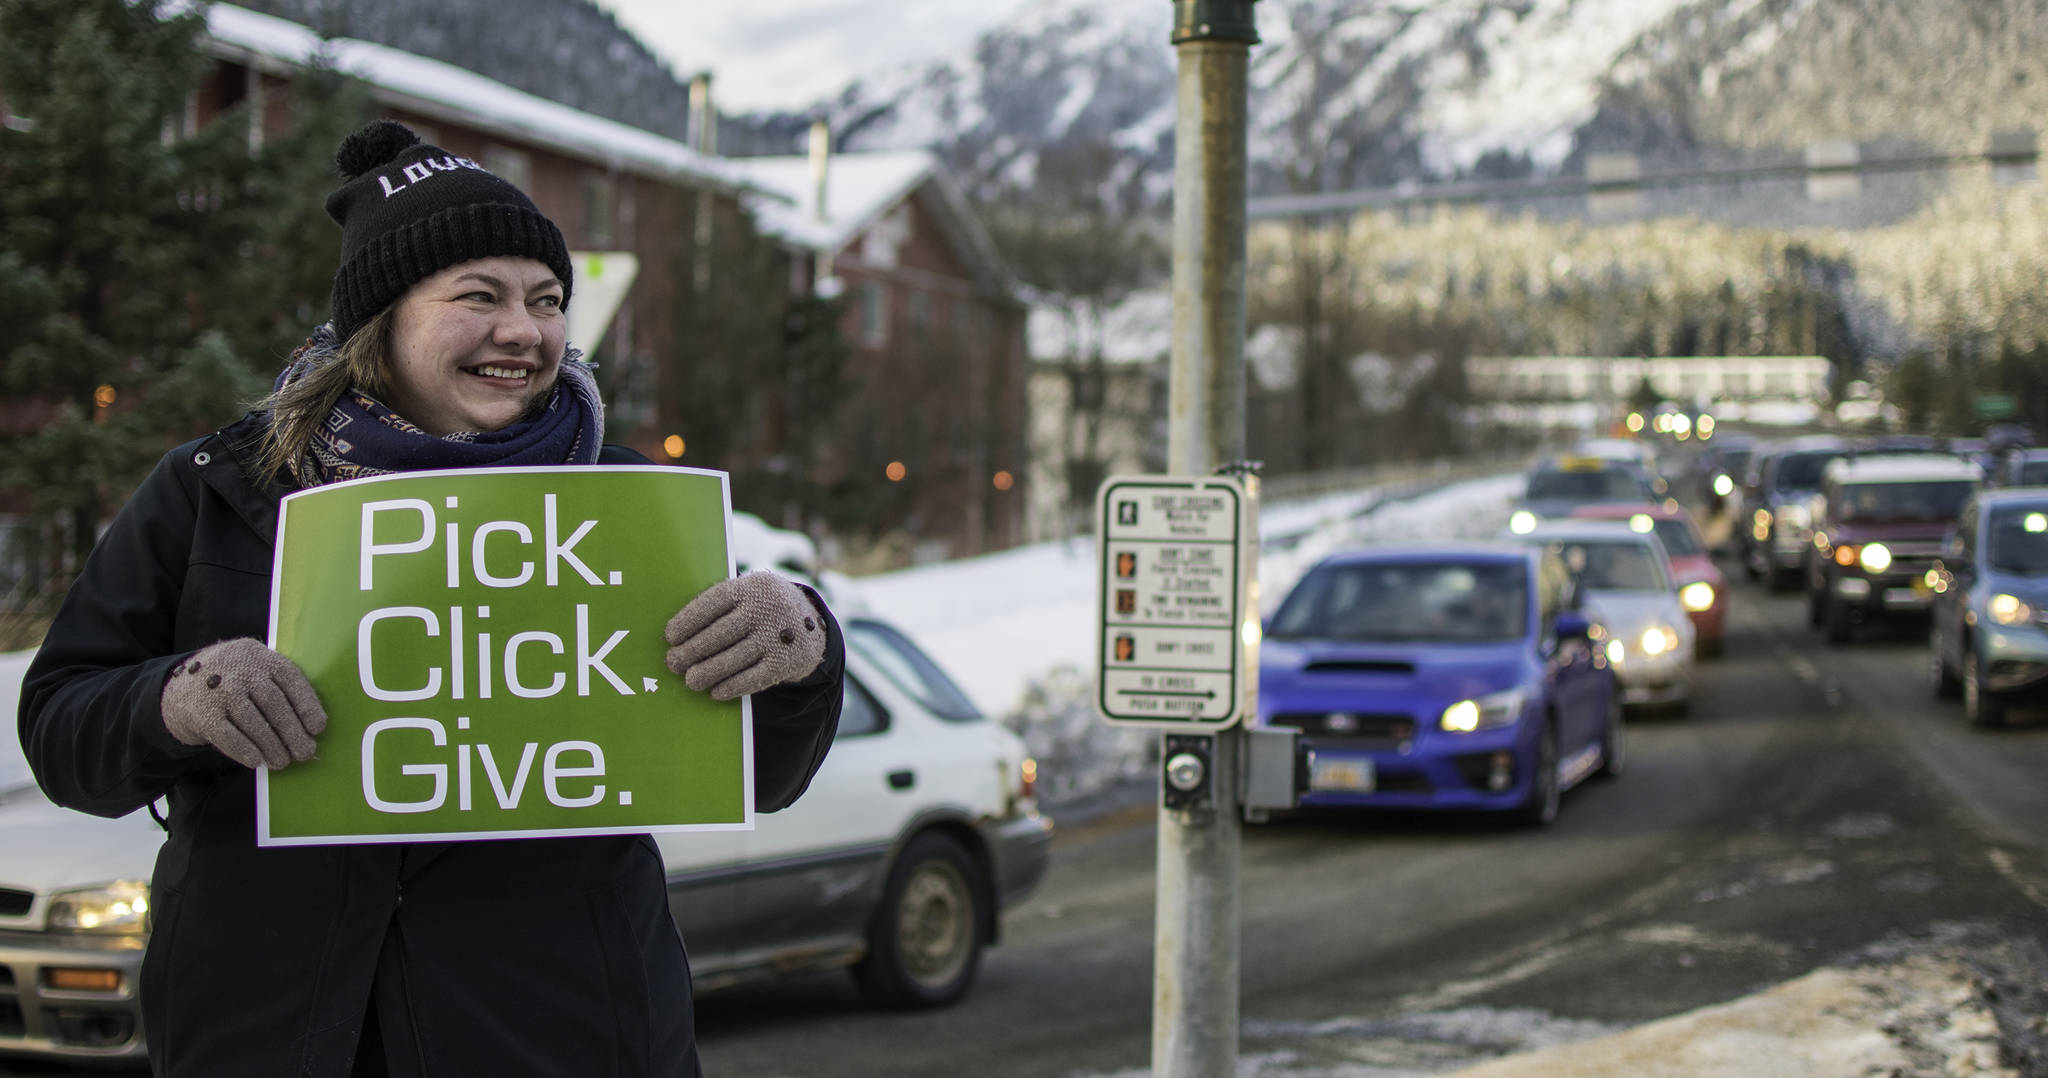 Mandy Cole stands on the corner of 10th St. and Egan Dr. on Thursday, March 1, 2018, encouraging drivers to donate money to non-profit organizations. (Richard McGrail | Juneau Empire)